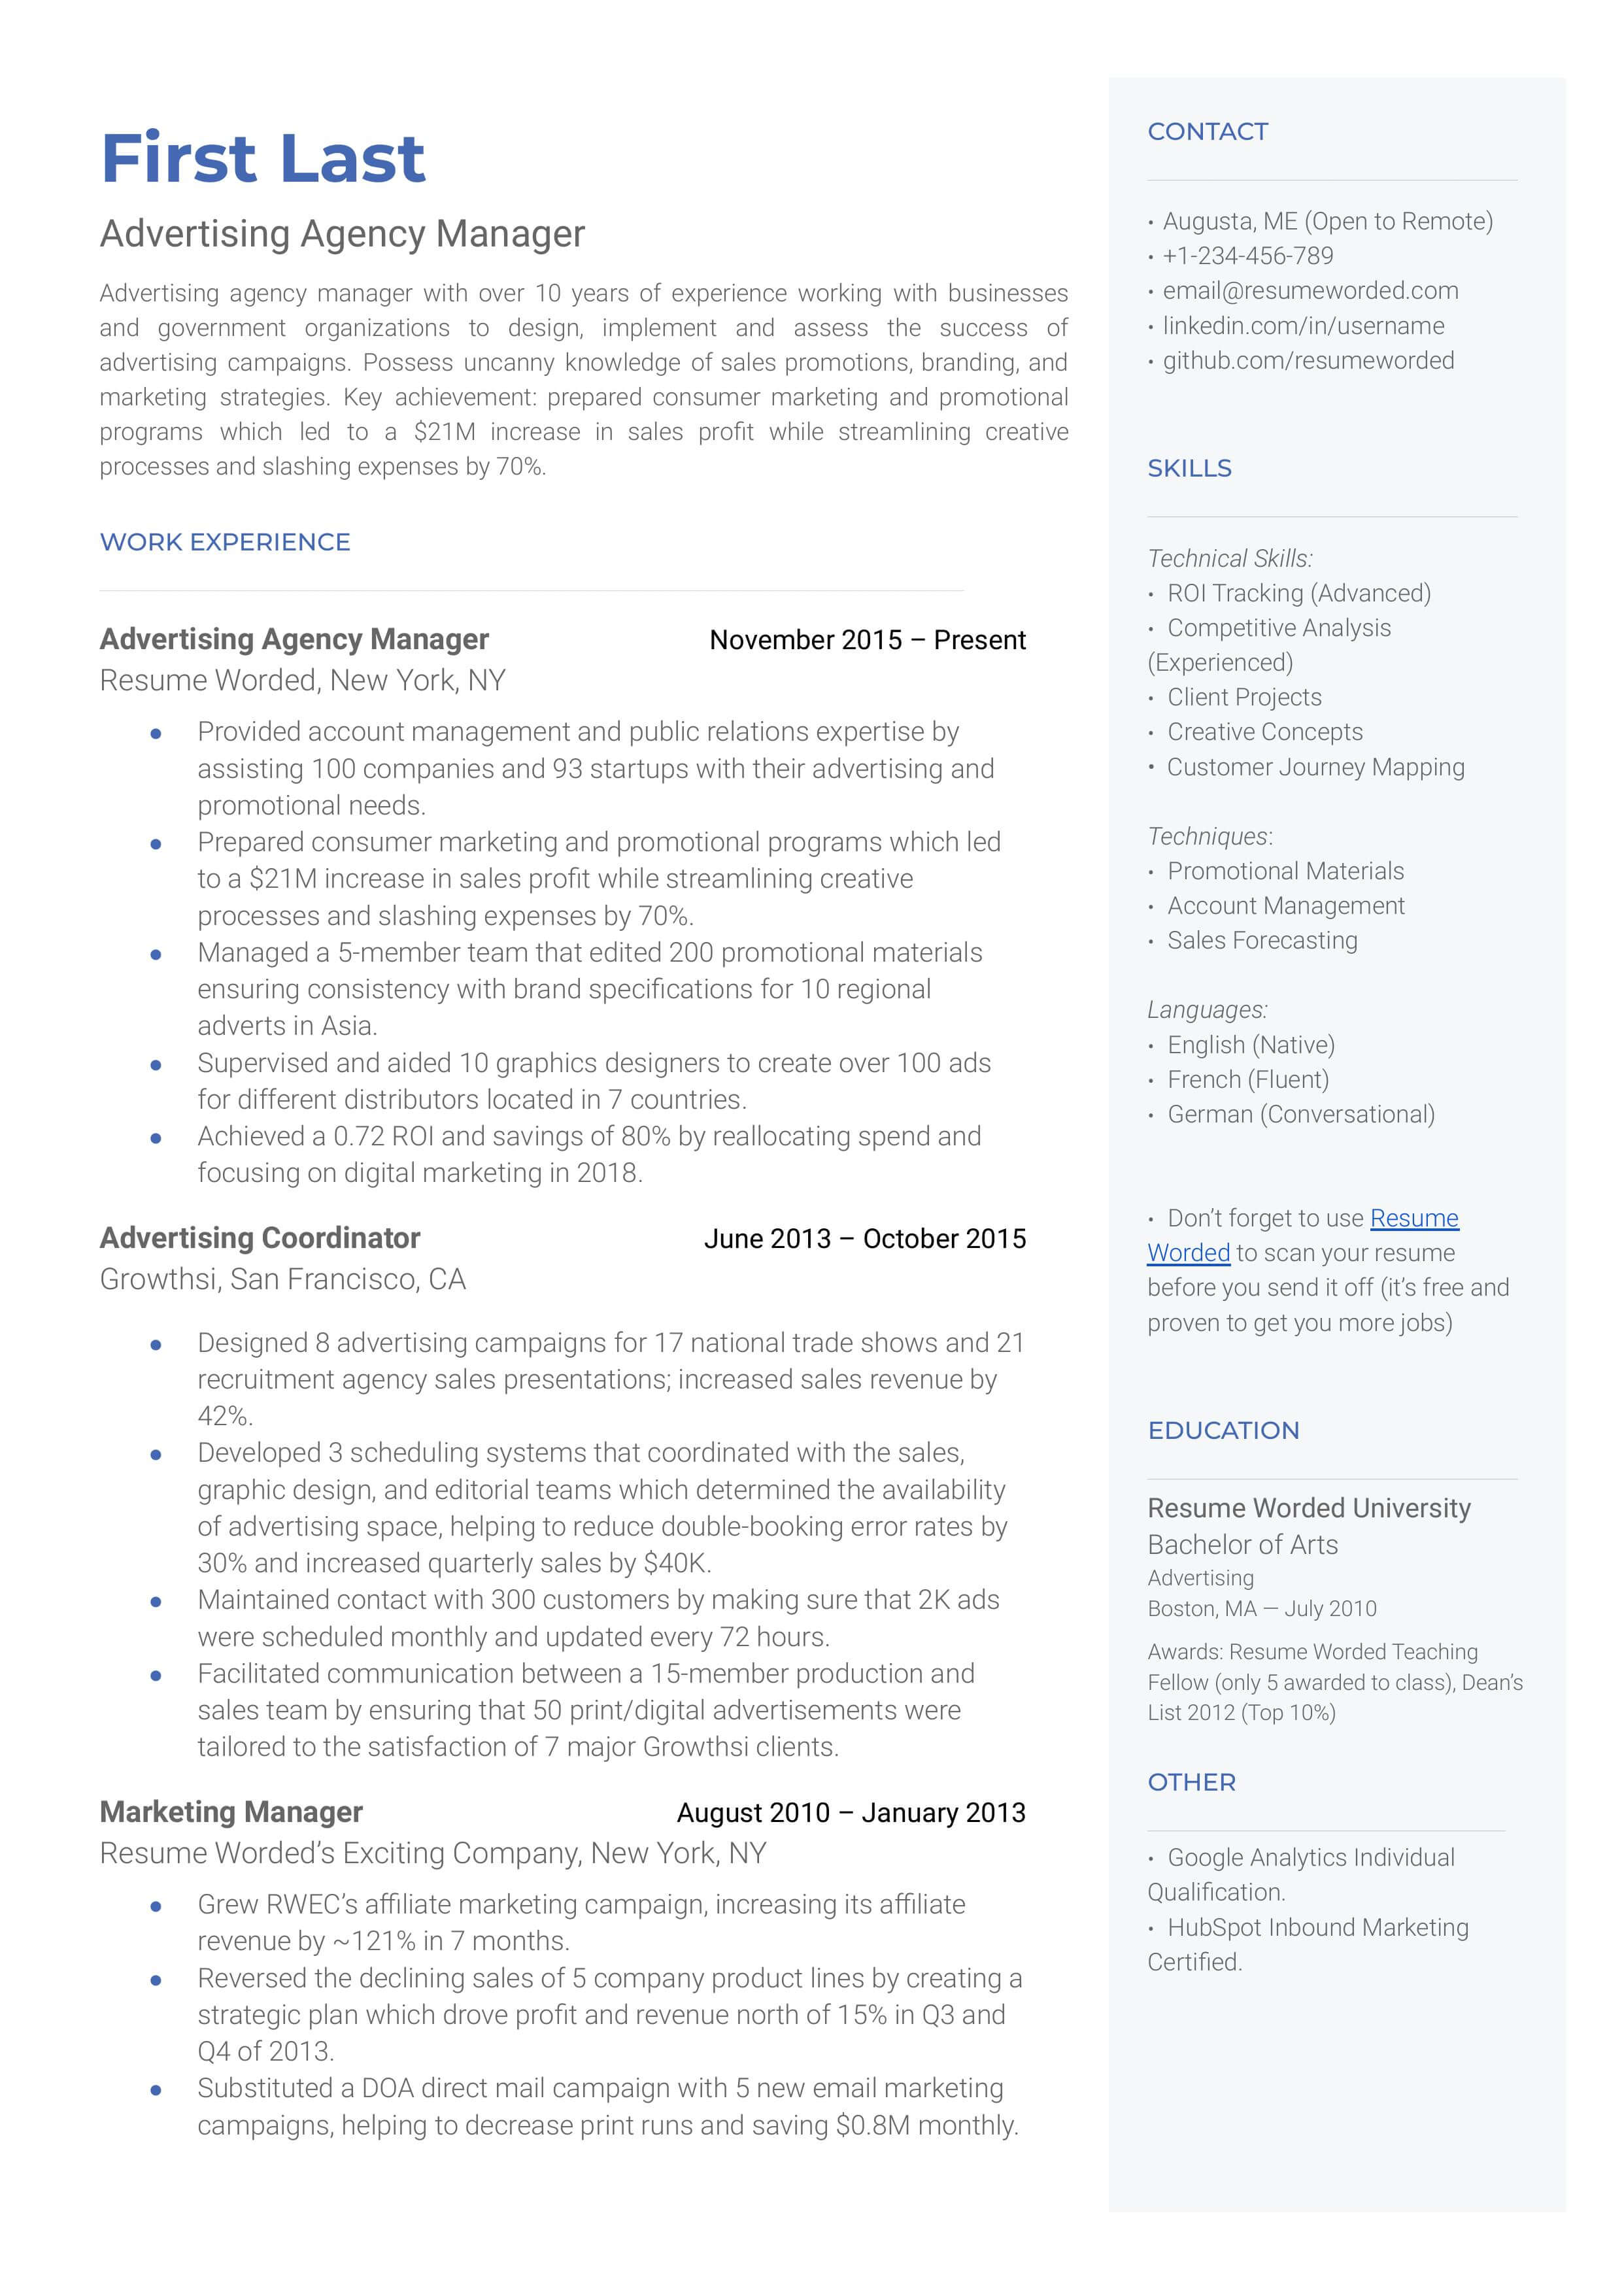 Advertising Agency Manager Resume Template + Example